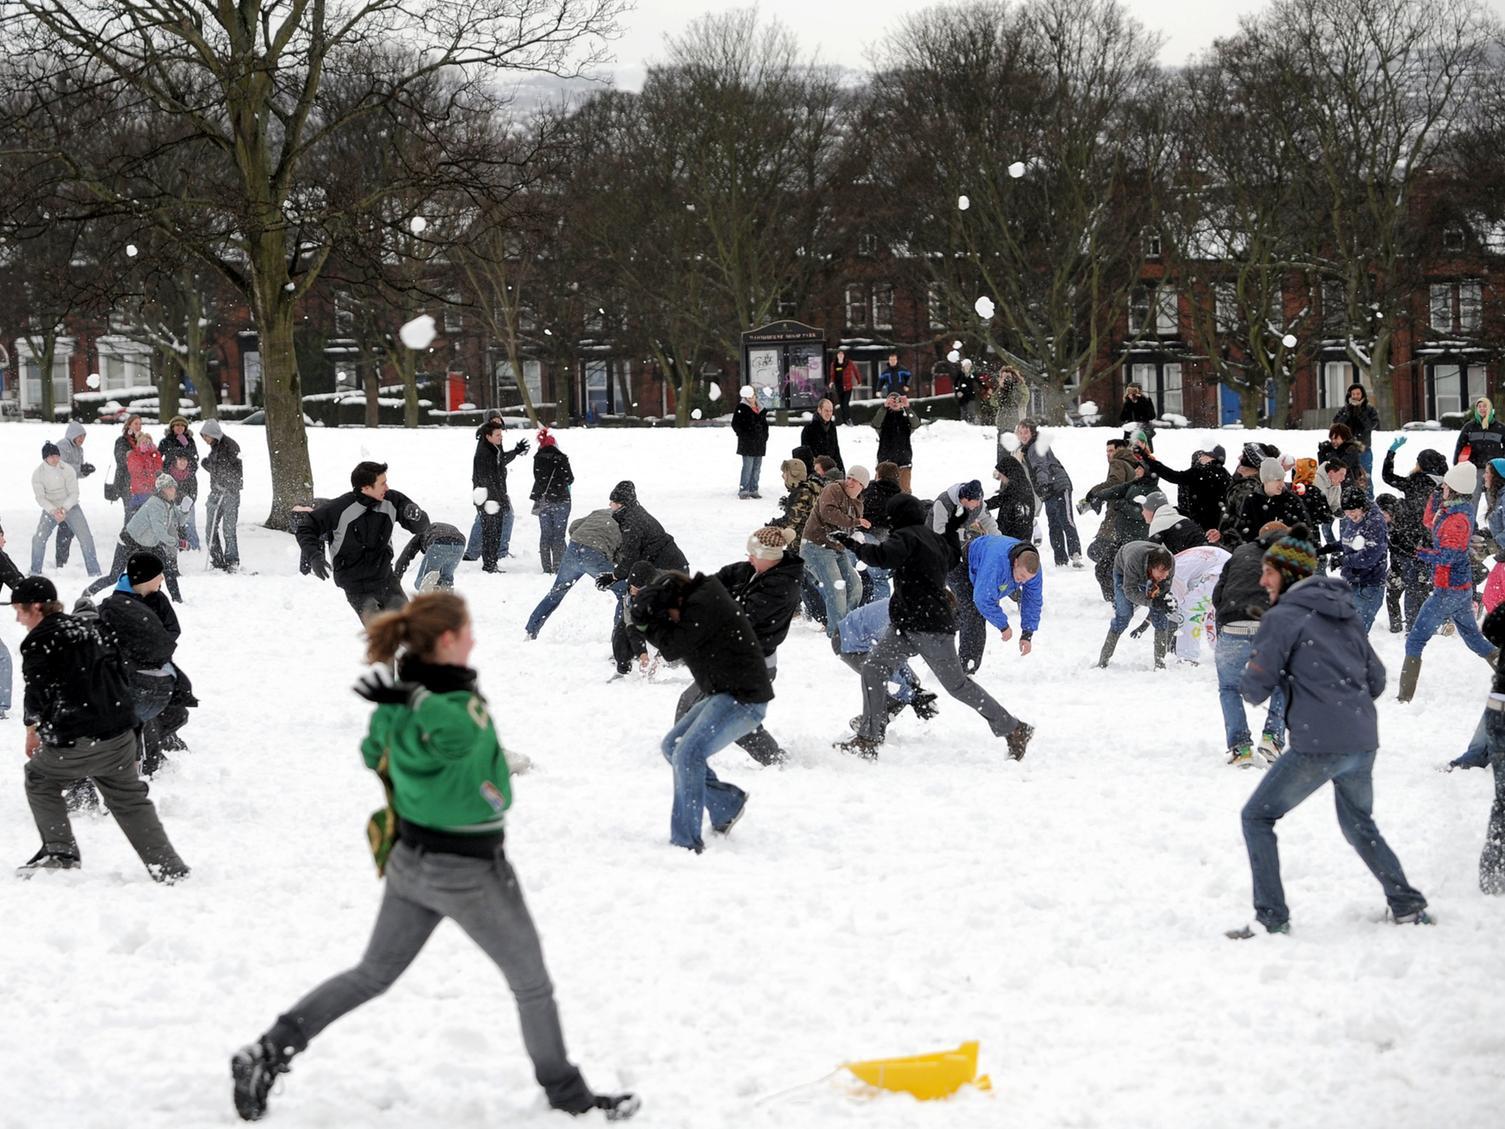 Spot the flying snowballs as the mass fight really got going.